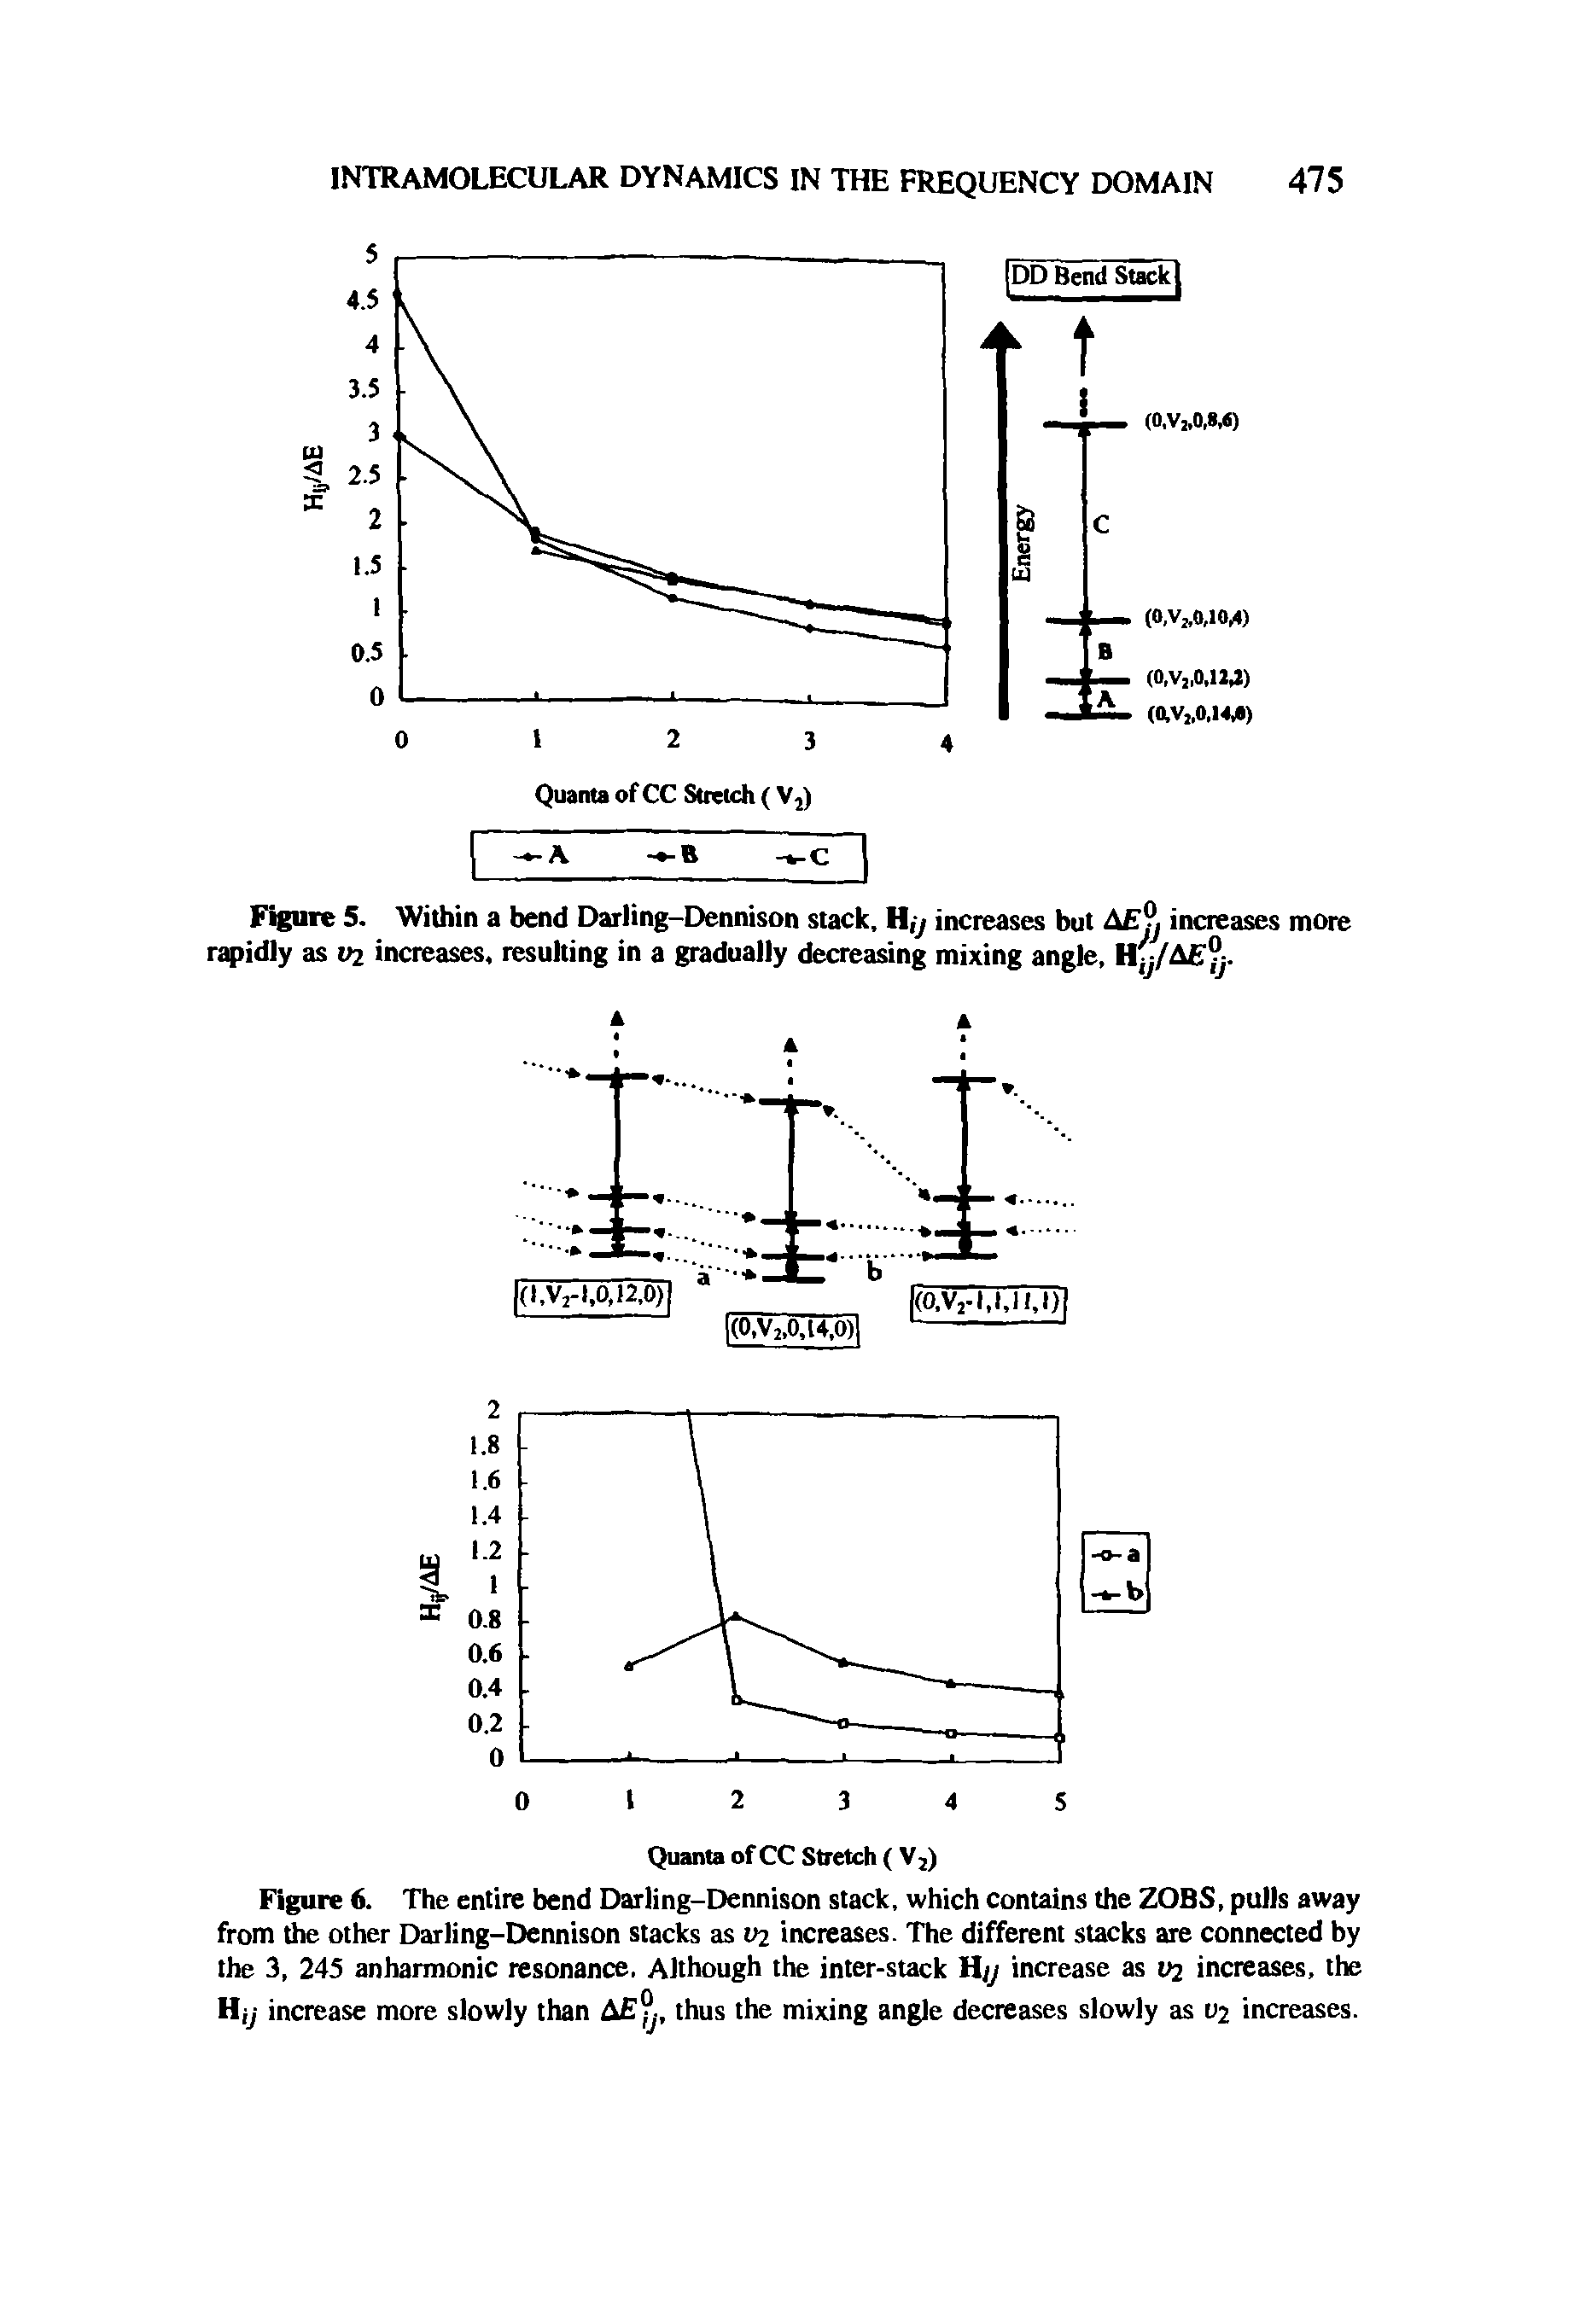 Figure 5. Within a bend Darling-Dennison stack, Hi/ increases but AEj. increases more rapidly as vz increases, resulting in a gradually decreasing mixing angle, Hy/AEy.